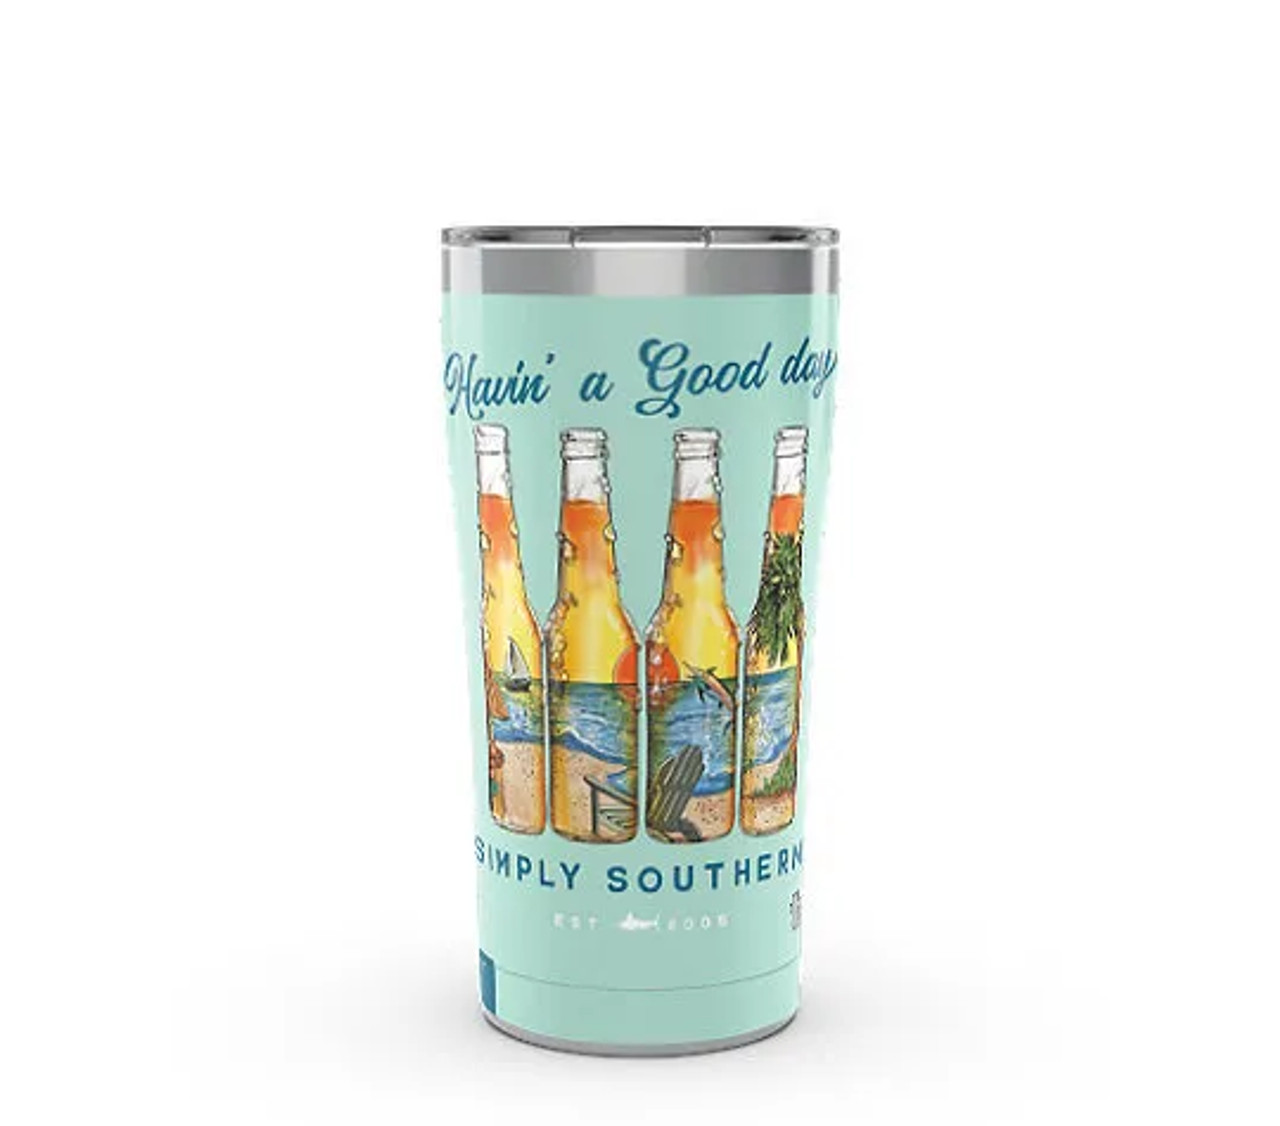 Tervis Simply Southern 20-fl oz Stainless Steel Tumbler at